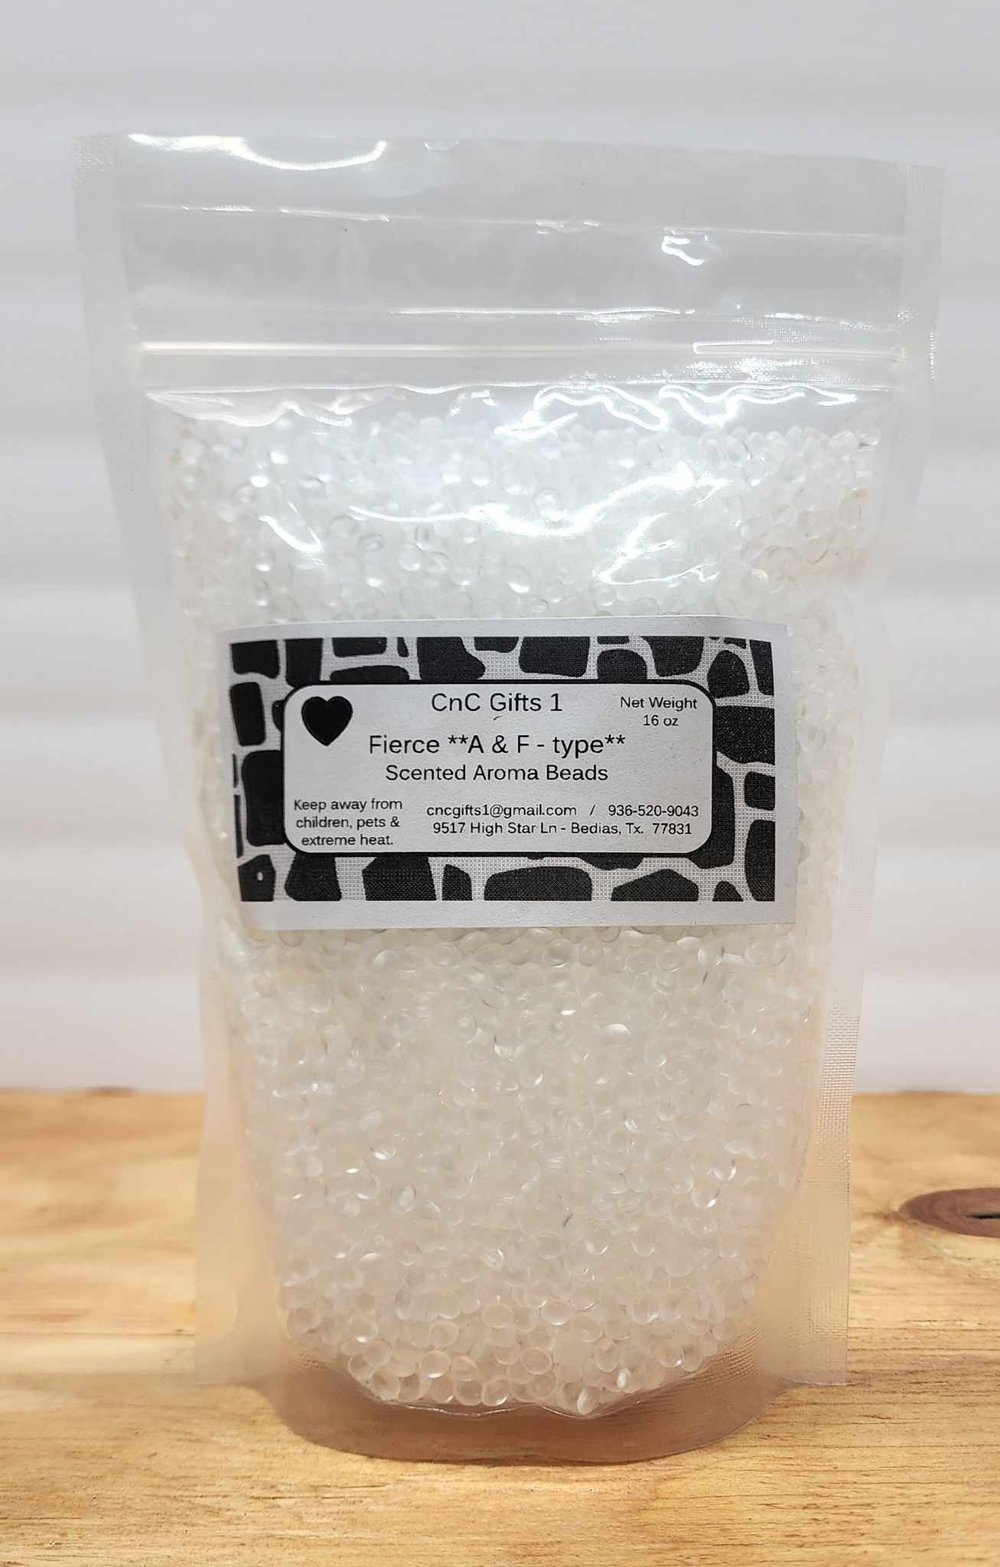 16 oz Scented Aroma Beads — CnC Gifts 1